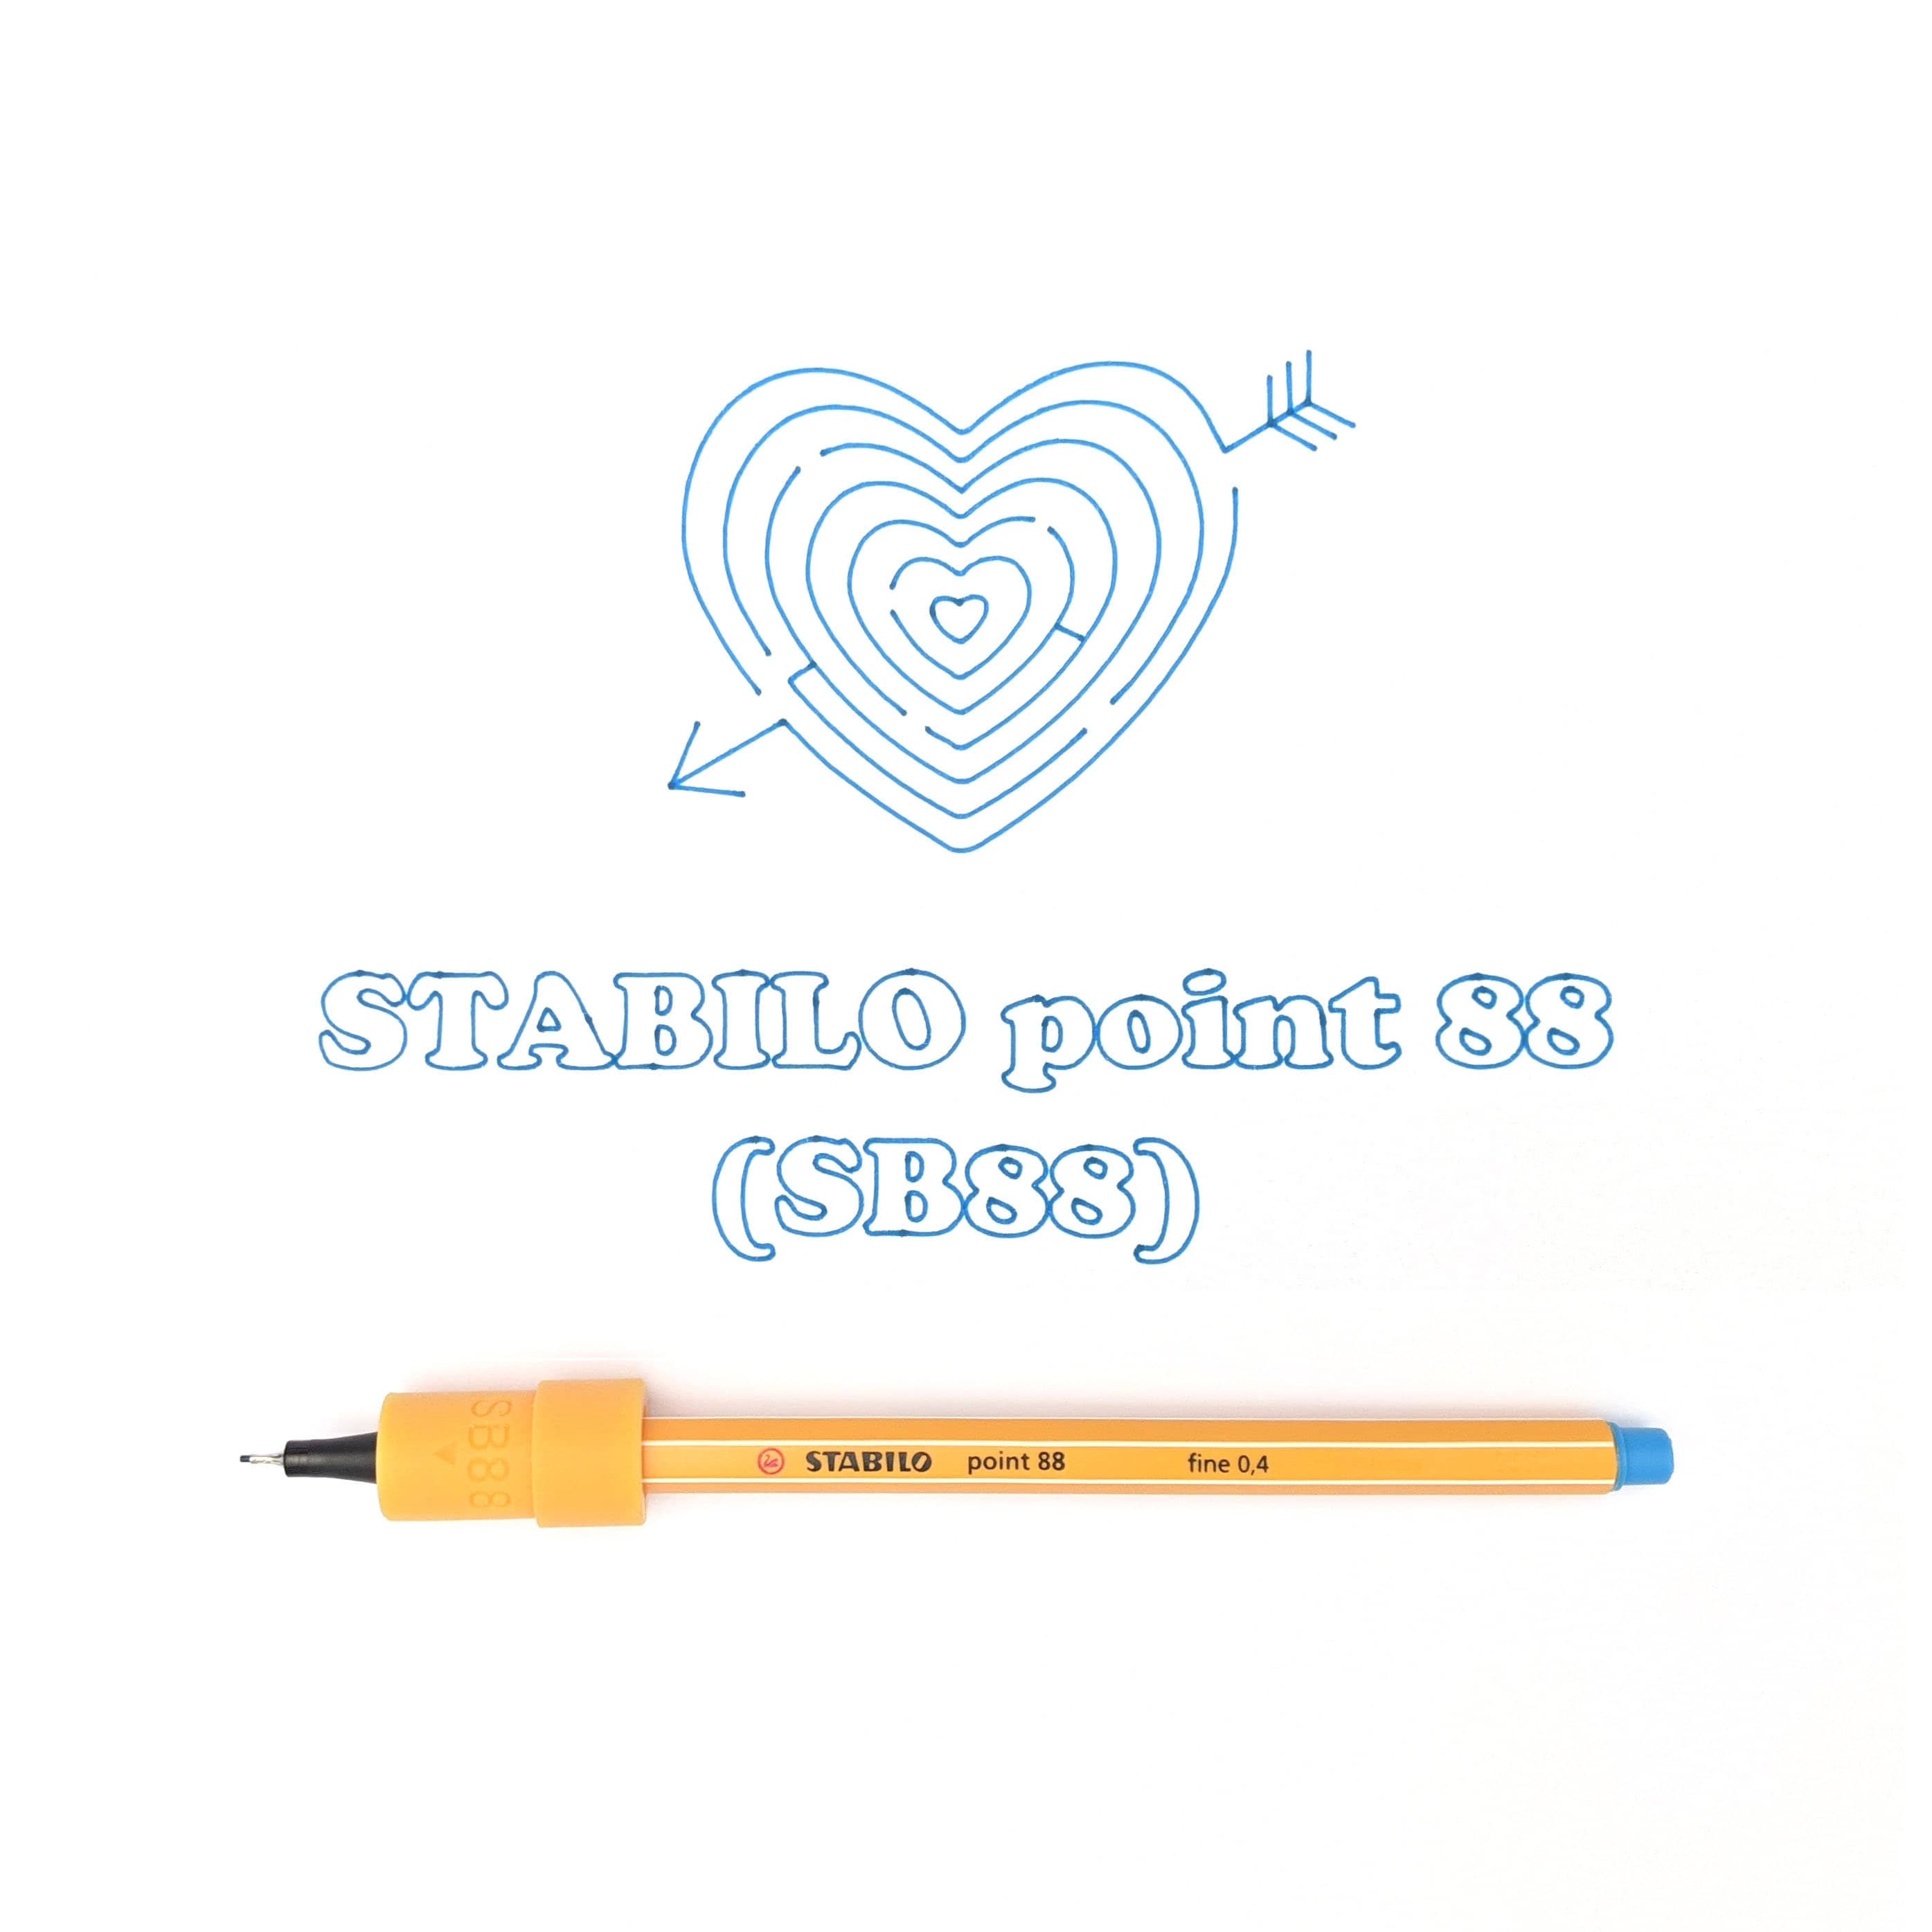 STABILO Pen Adapter point 88 / Point 68 for Cricut Machines maker 3,  Explore 4, Explore Air, Explore Air 2, Maker 